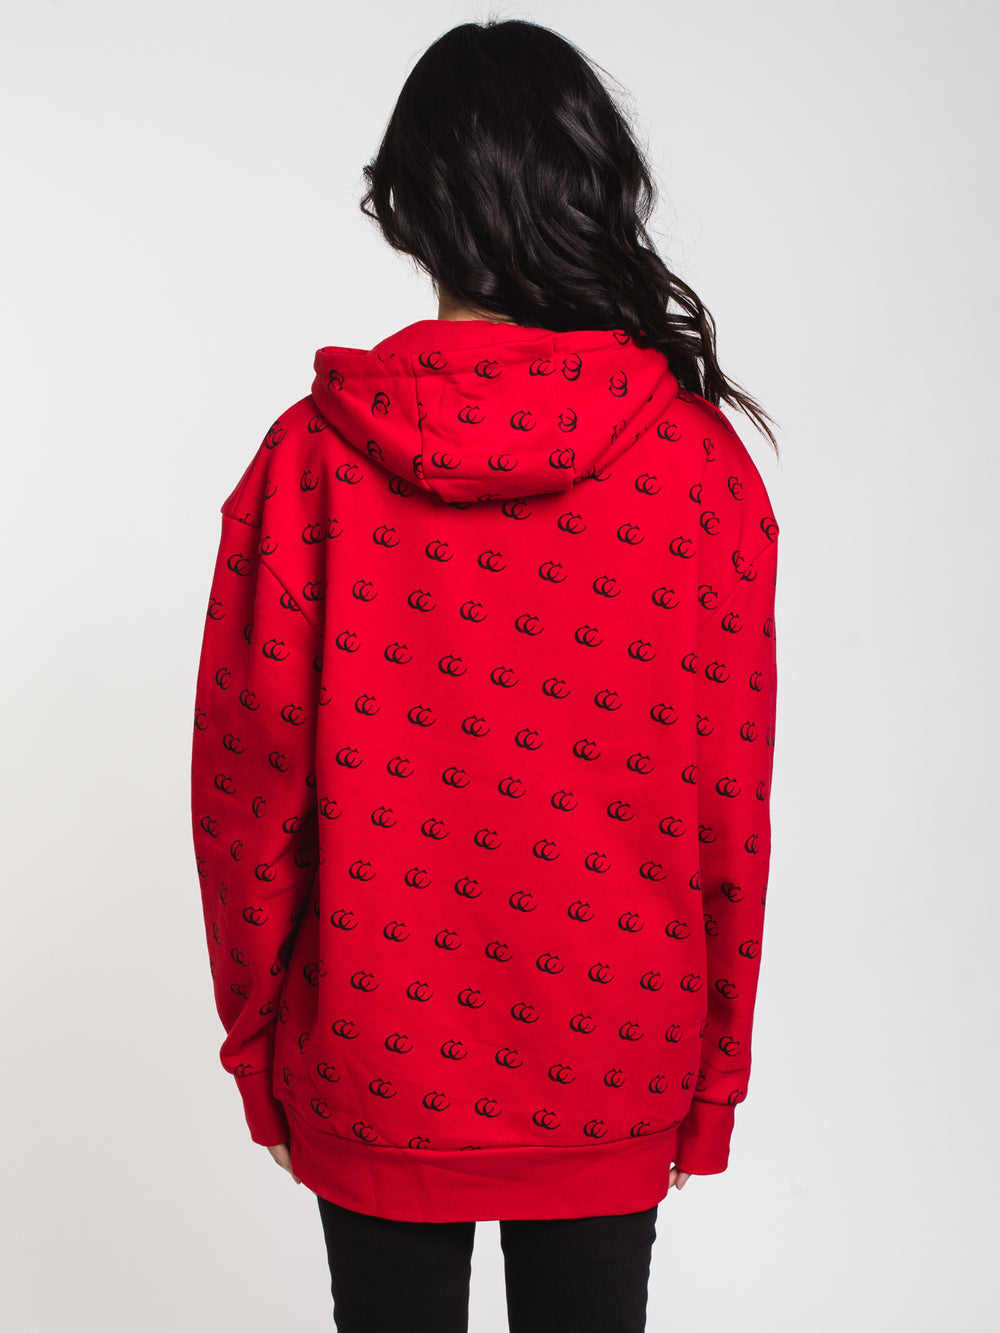 WOMENS C&C ALL OVER PRINT HOODIE FLEECE - RED - CLEARANCE